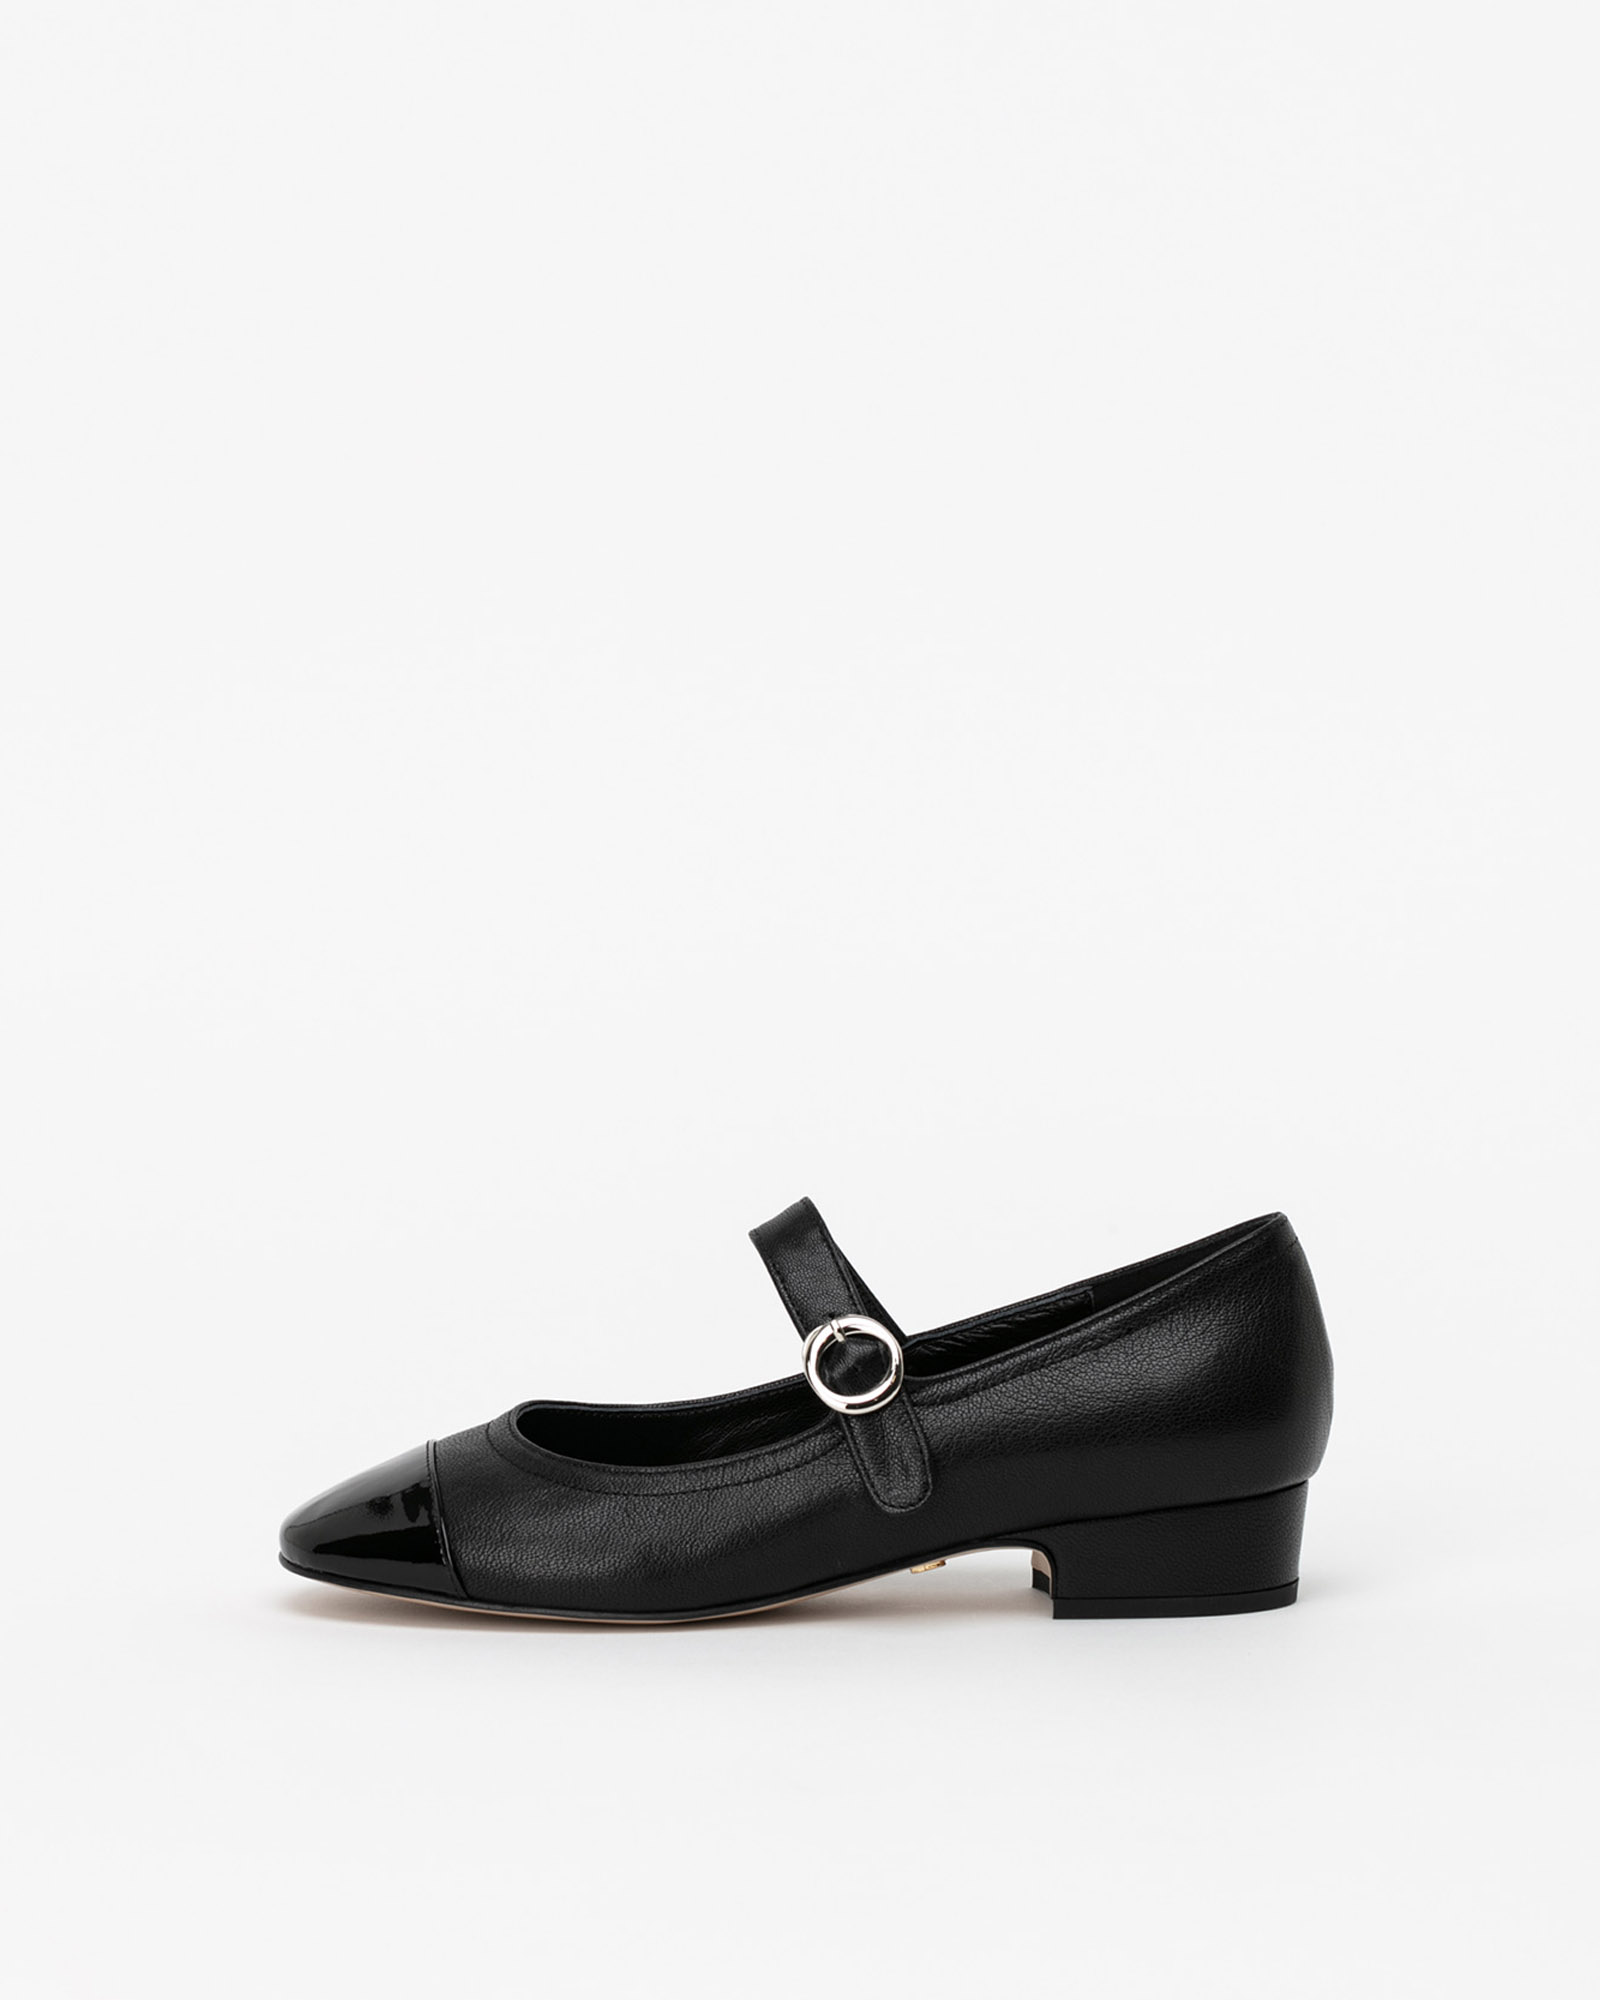 Fatele Maryjane Shoes in Black with Black Patent Toe